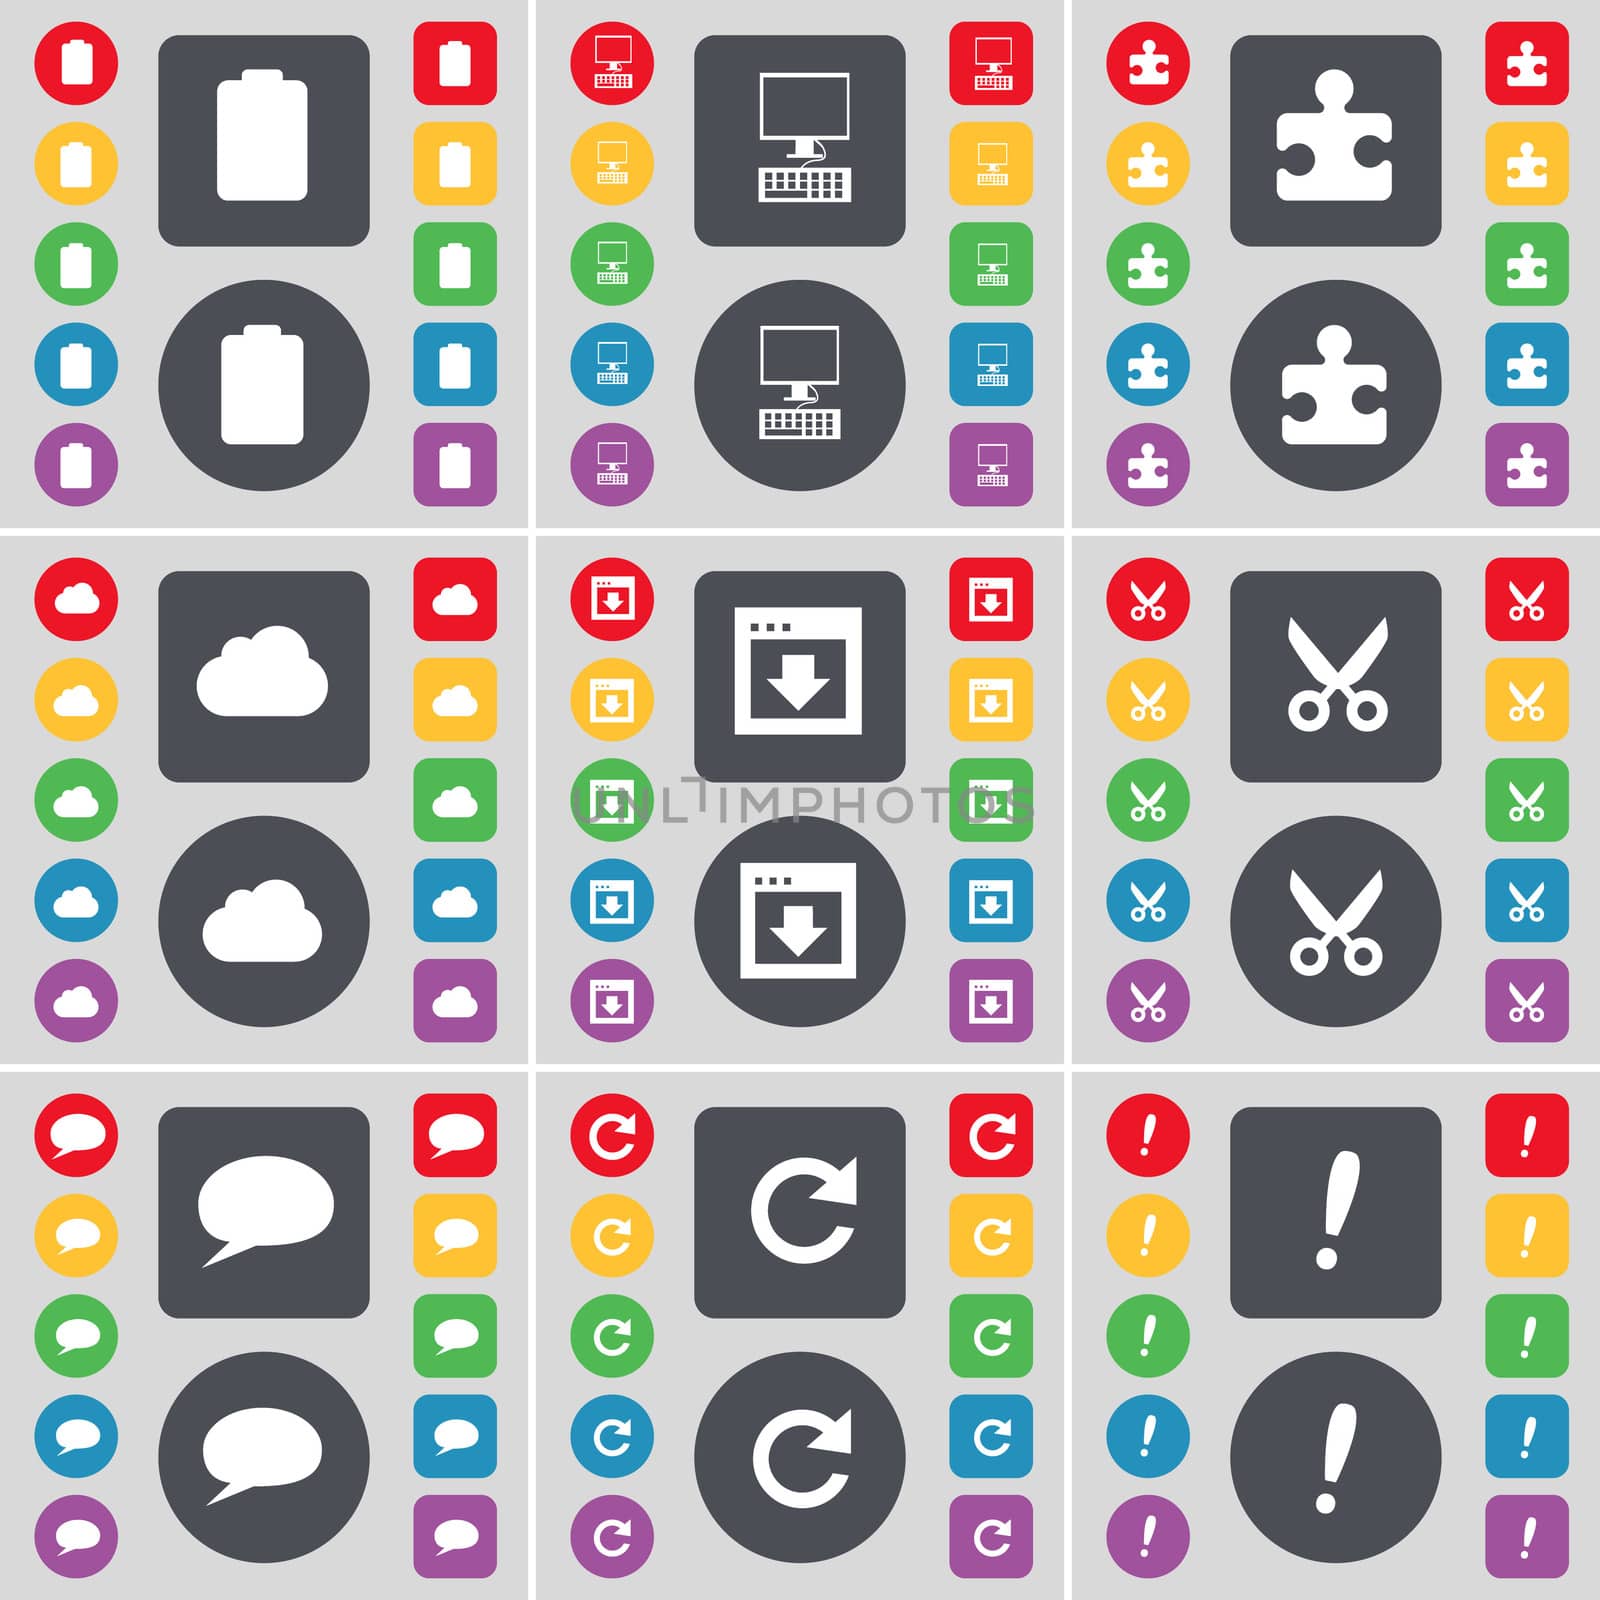 Battery, PC, Puzzle part, Cloud, Window, Airplane, Chat bubble, Reload, Exclamation mark icon symbol. A large set of flat, colored buttons for your design. illustration